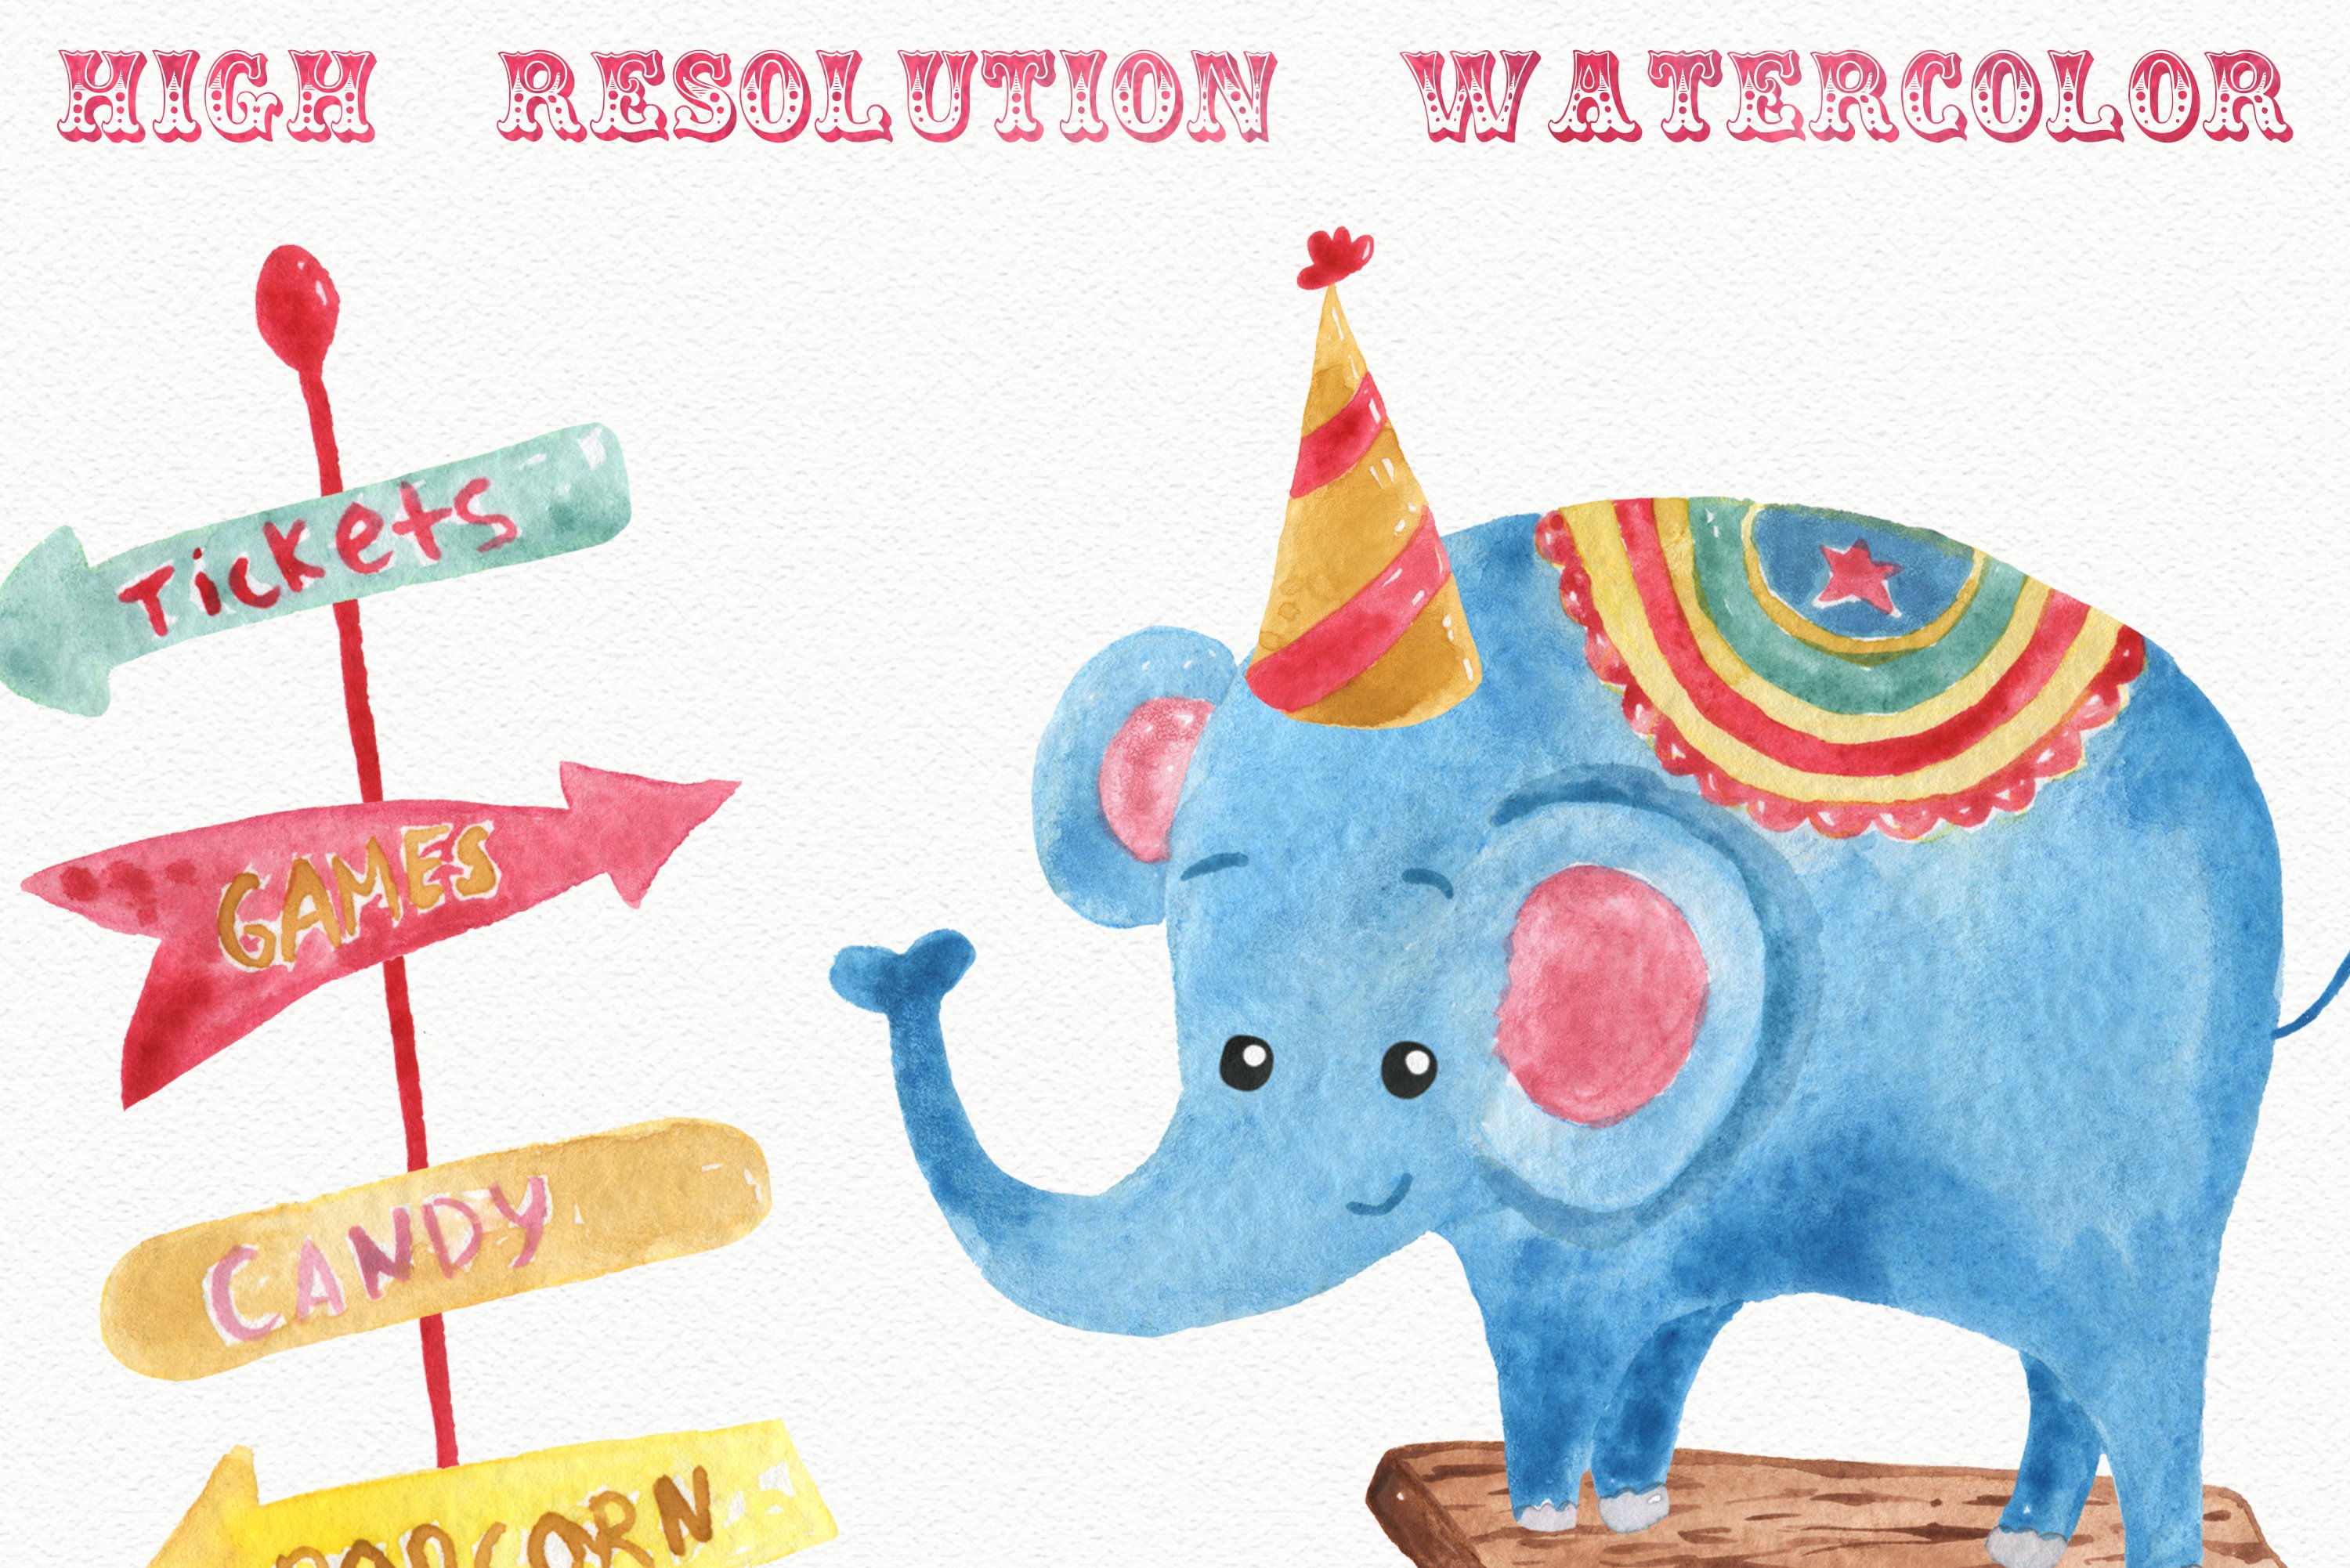 This is a high resolution watercolor clipart.